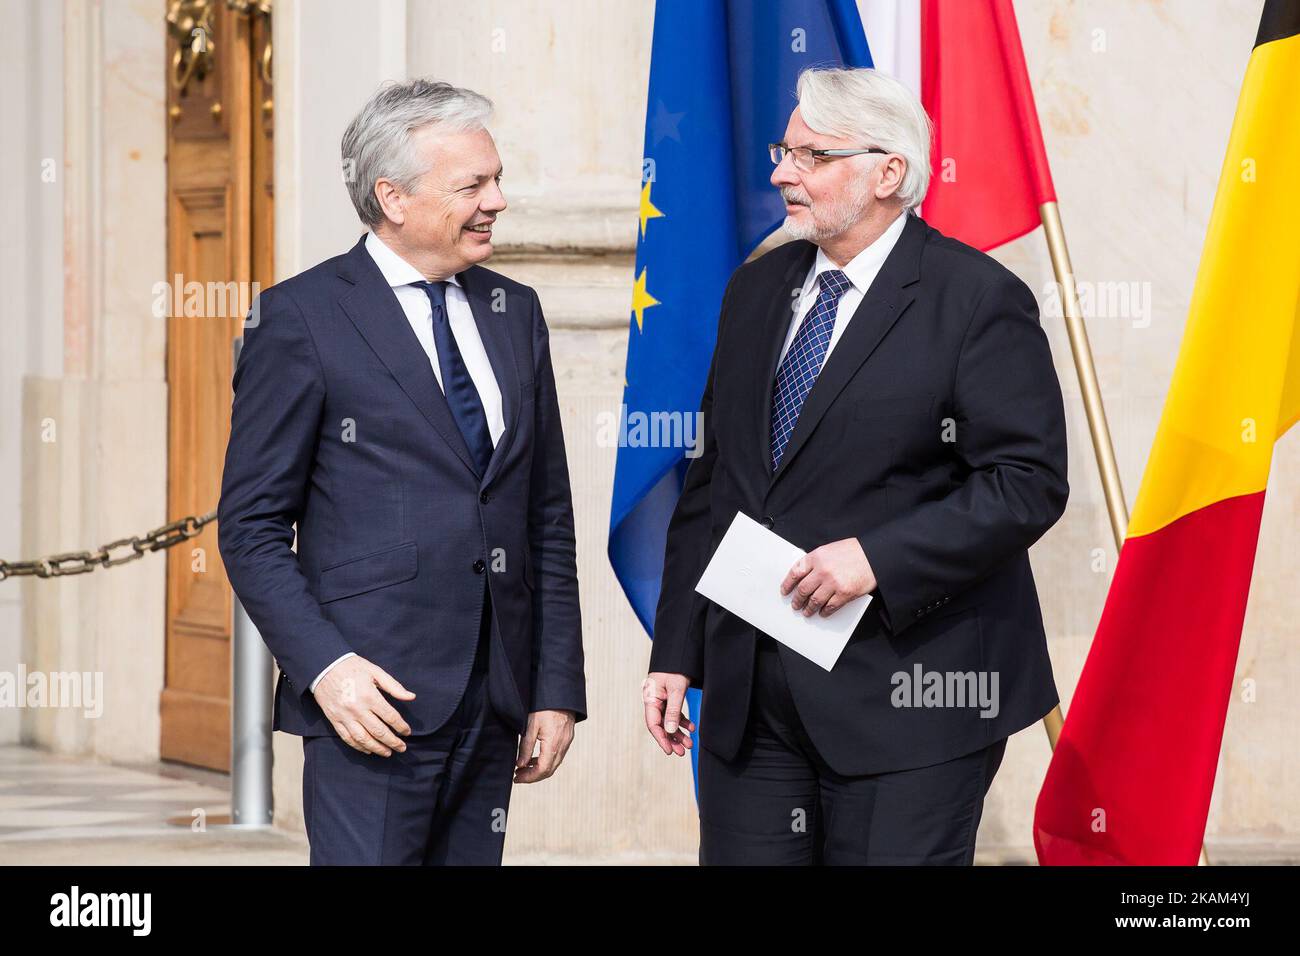 Minister of Foreign Affairs of Poland, Witold Waszczykowski (R) and Minister of Foreign Affairs of Belgium, Didier Reynders (L) in Warsaw, Poland on 14 March 2017 (Photo by Mateusz Wlodarczyk/NurPhoto) *** Please Use Credit from Credit Field *** Stock Photo